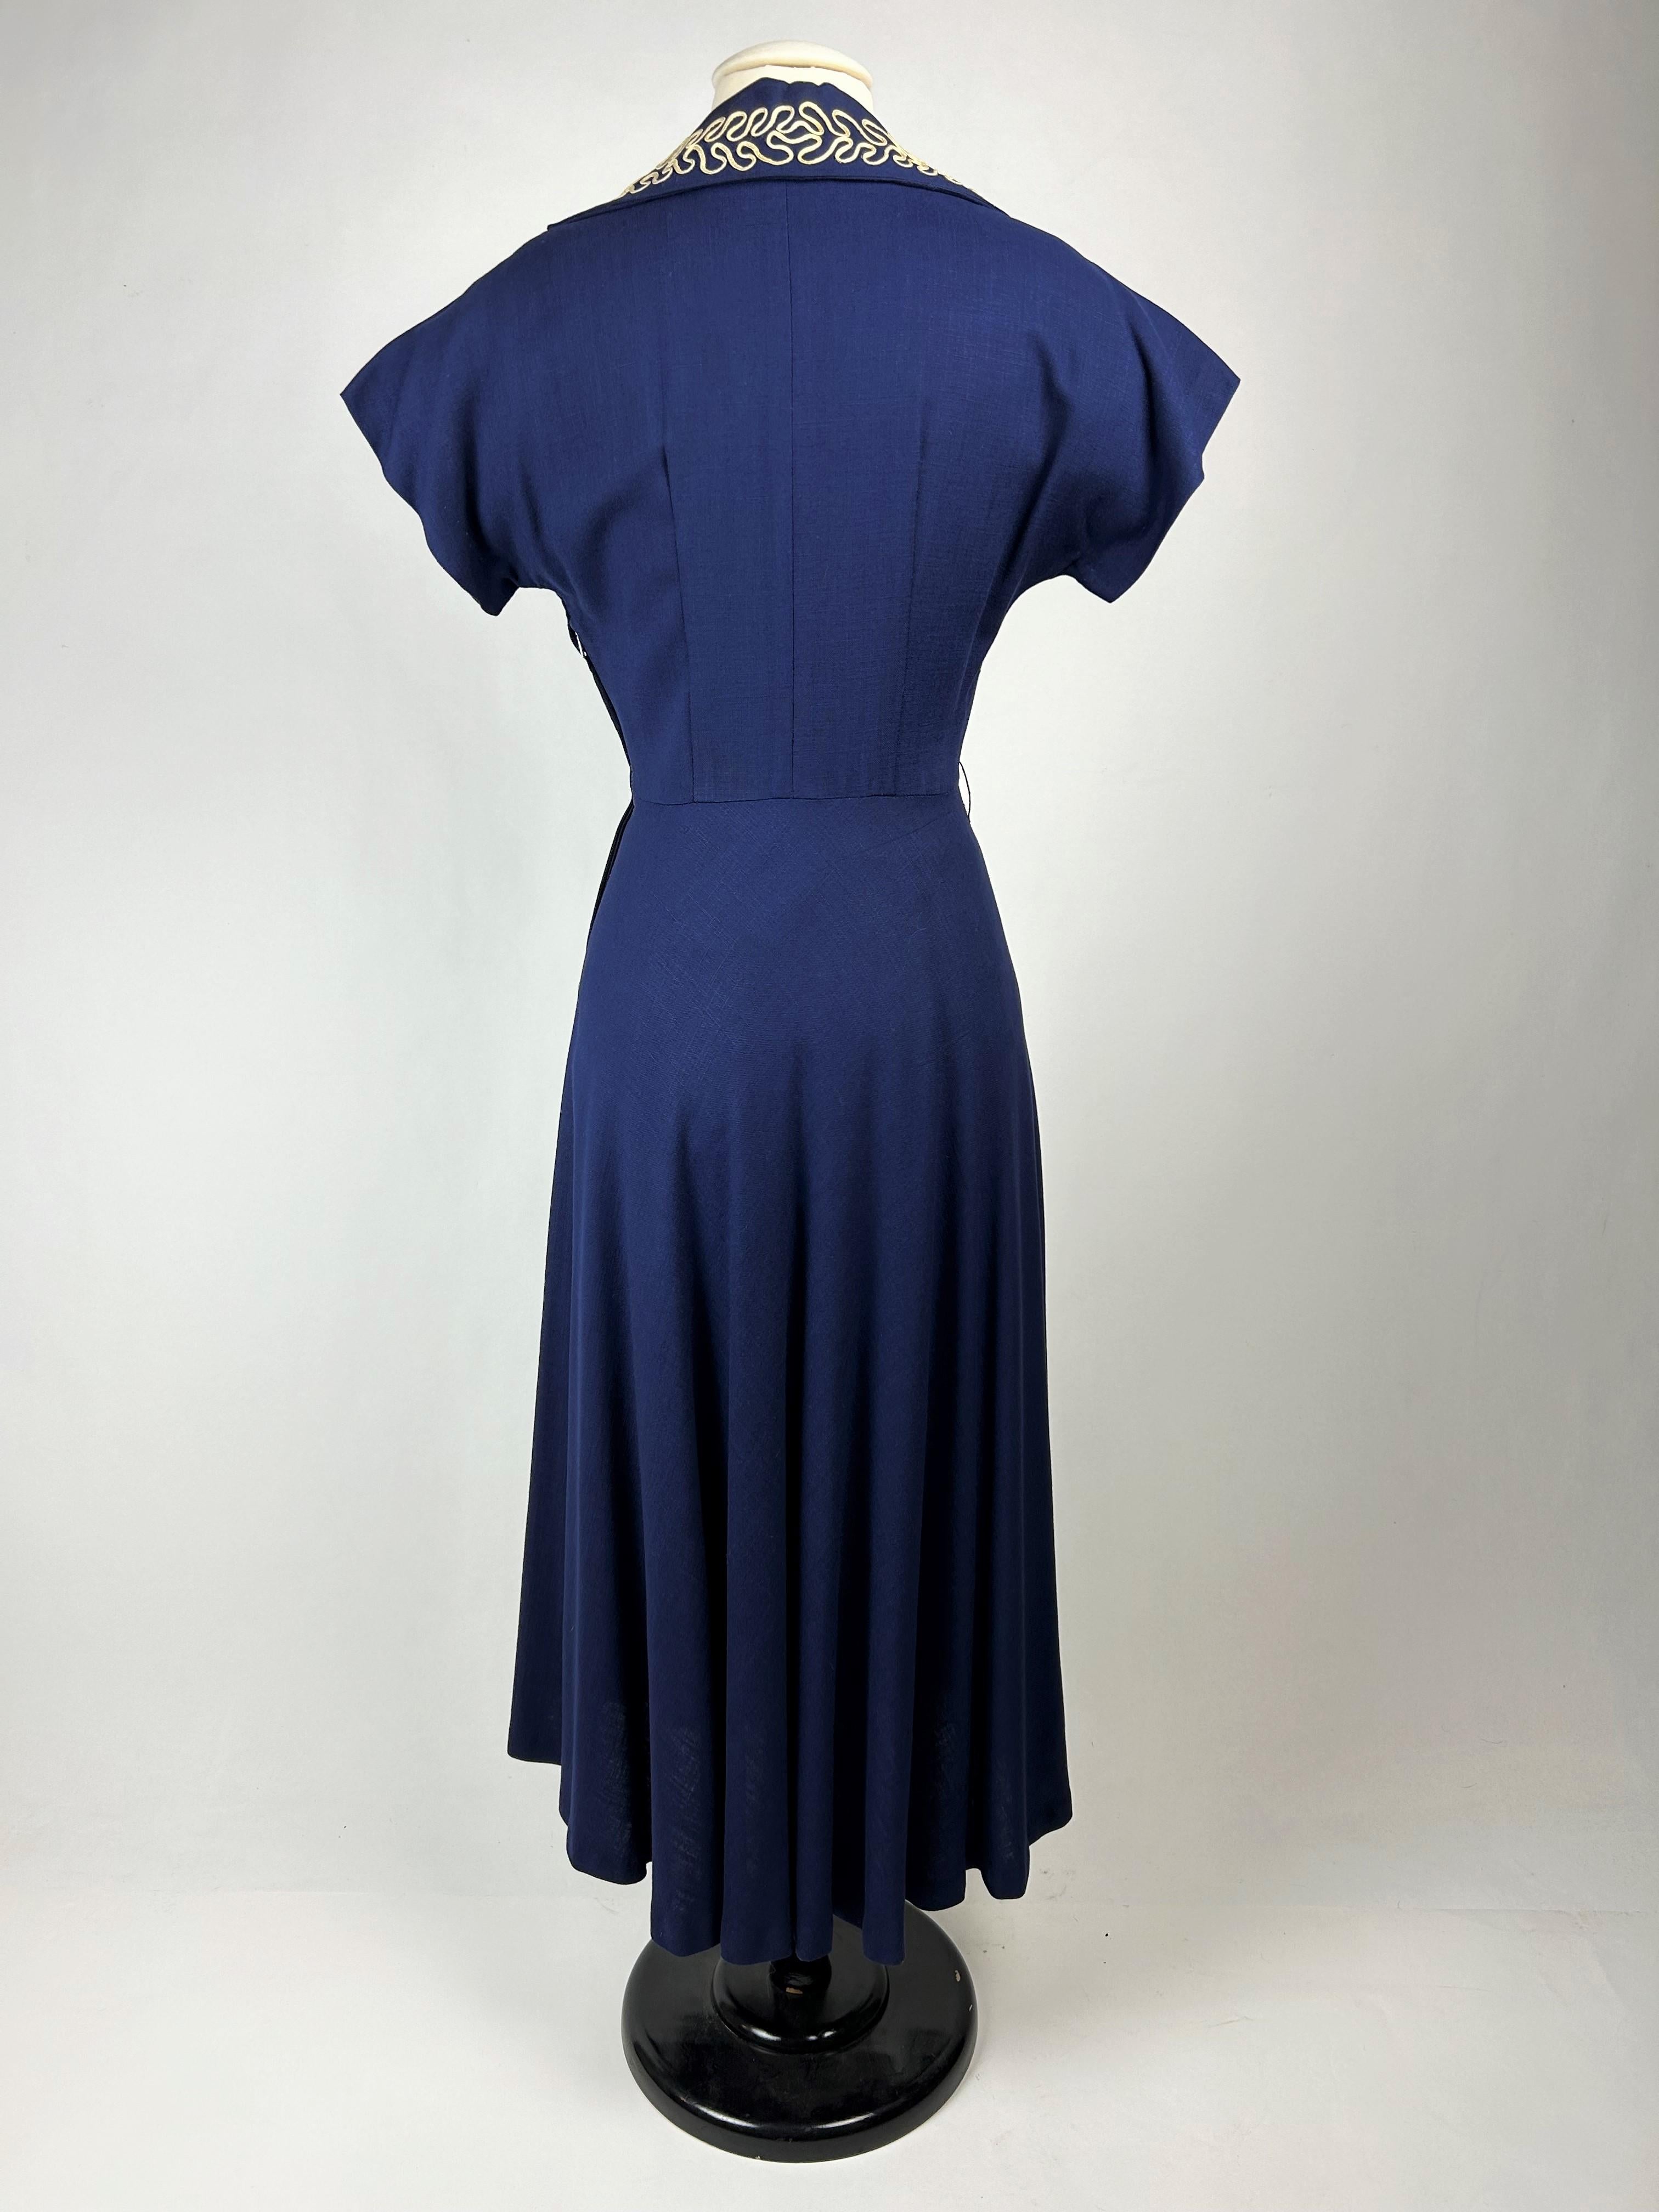 A Navy French Day Dress with white piping appliqué Circa 1945-1950 For Sale 11